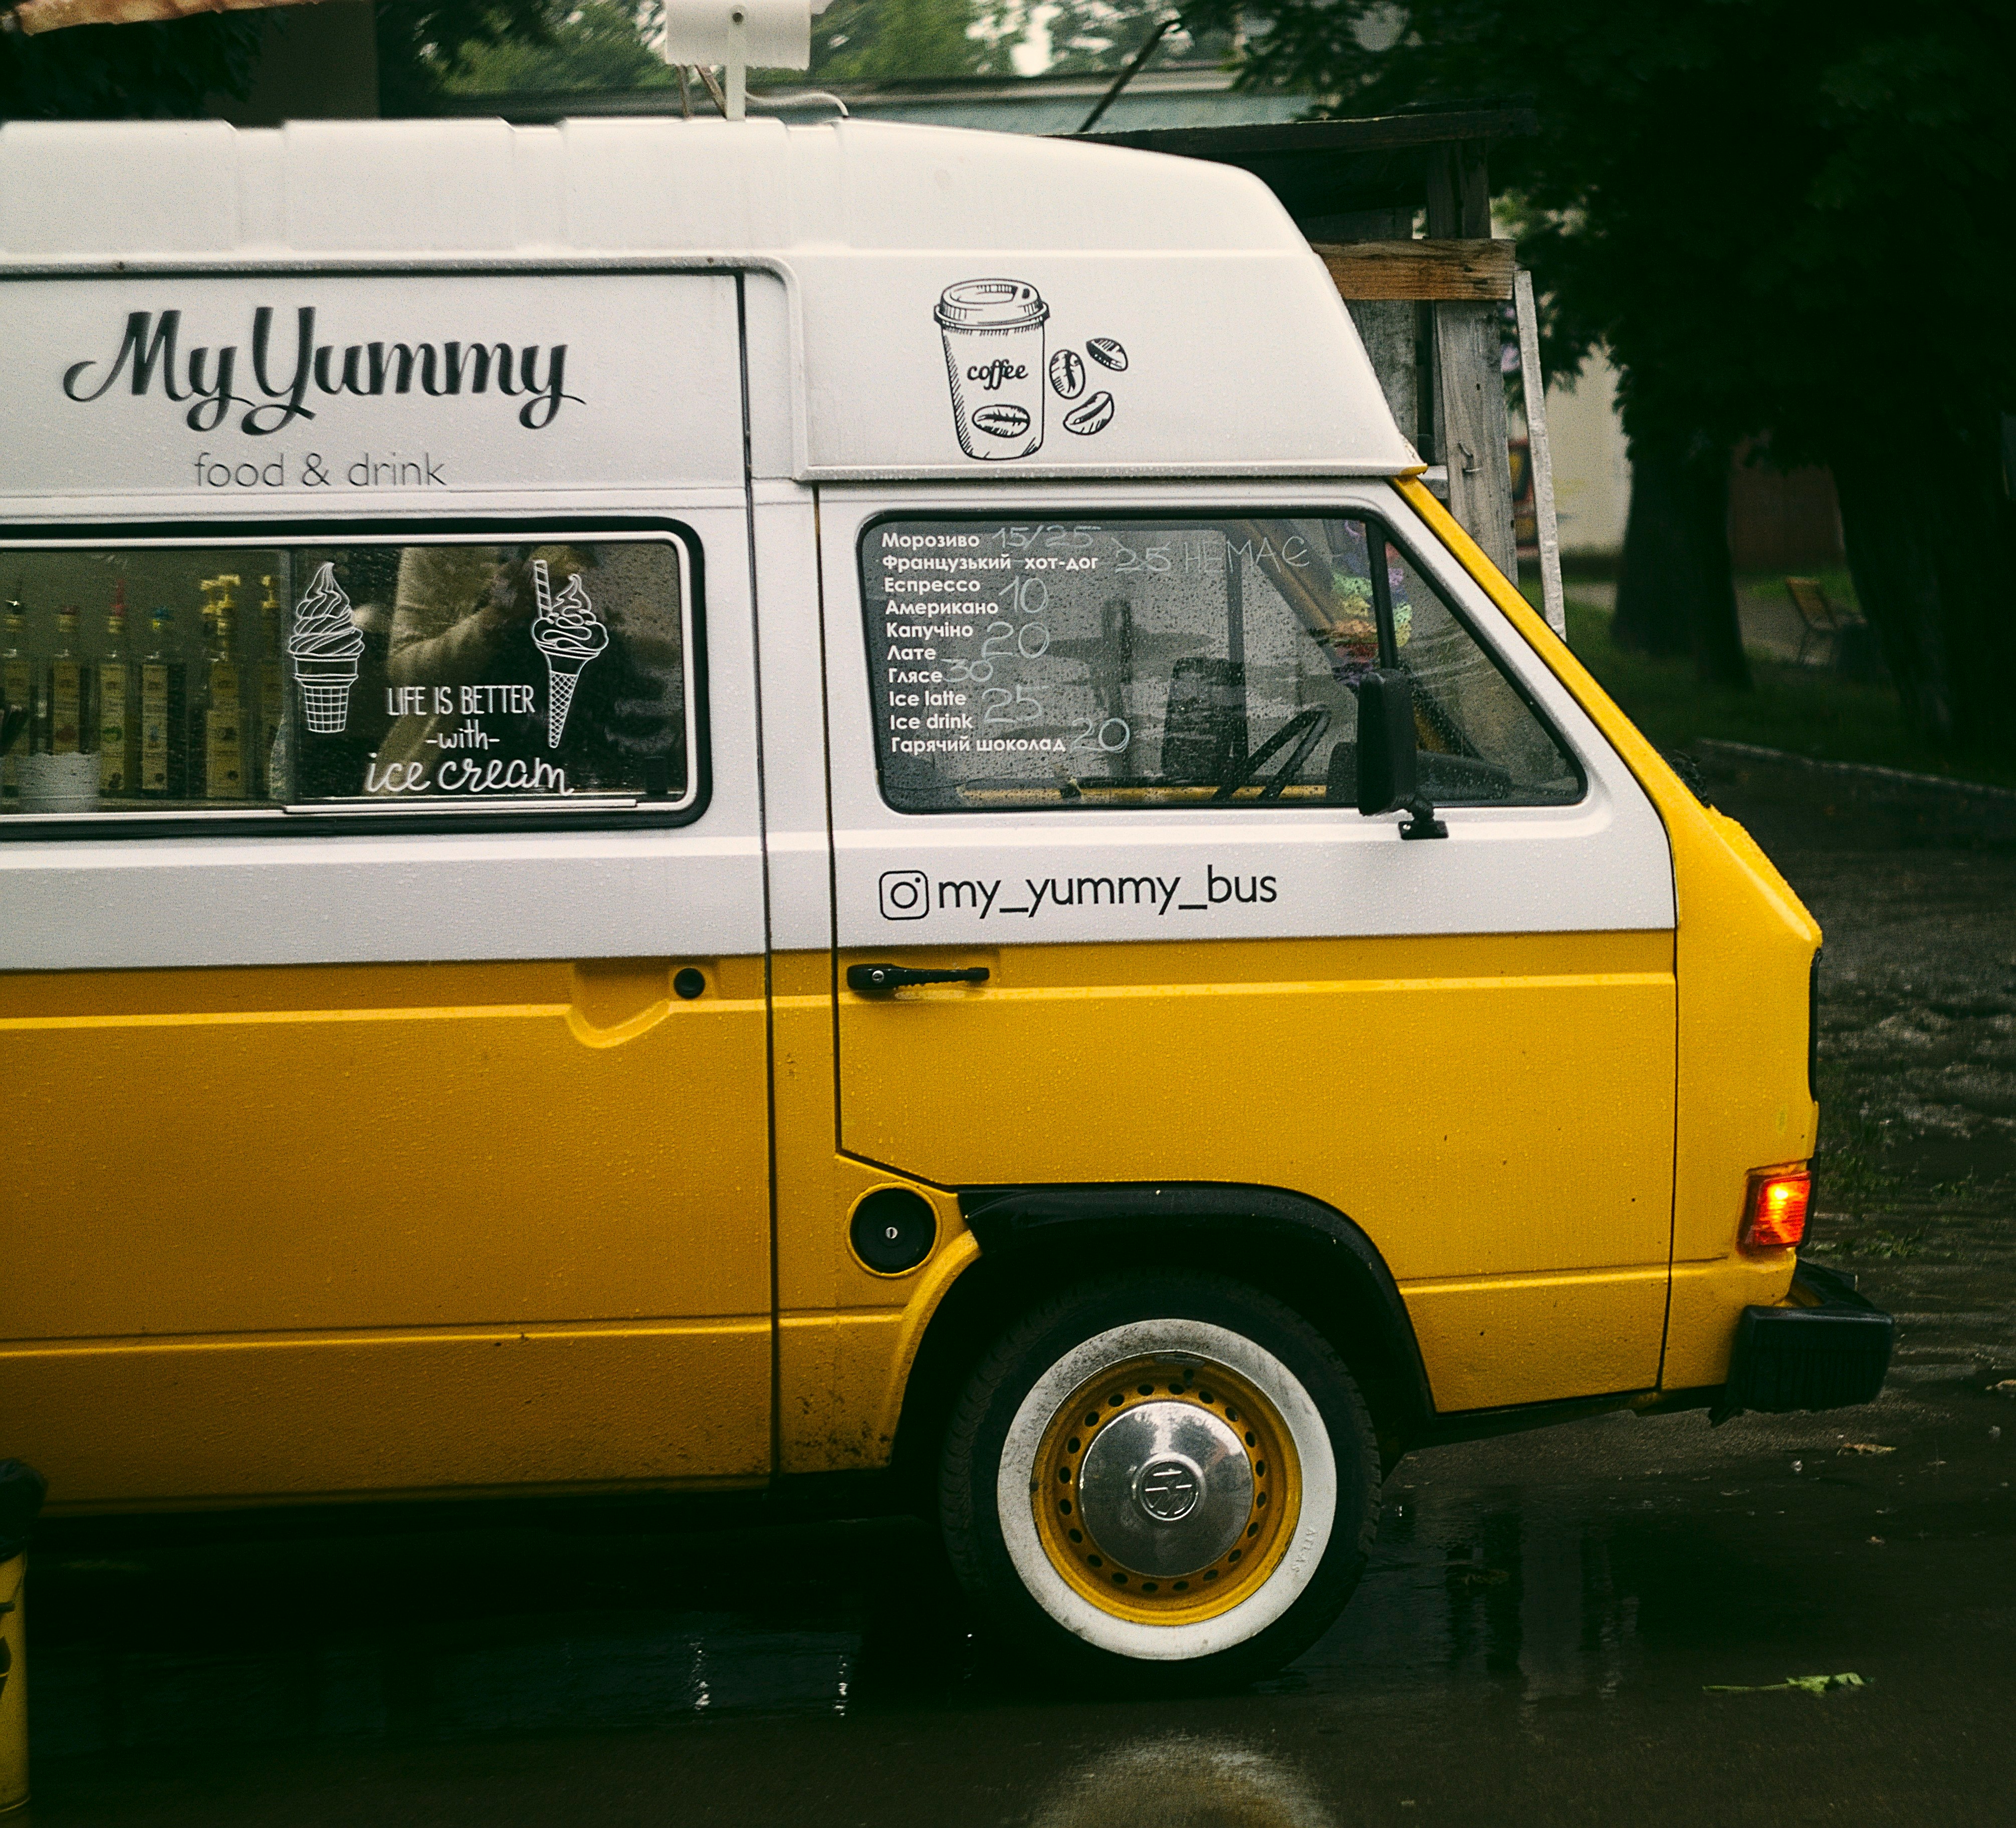 close-up photo of white and yellow food truck